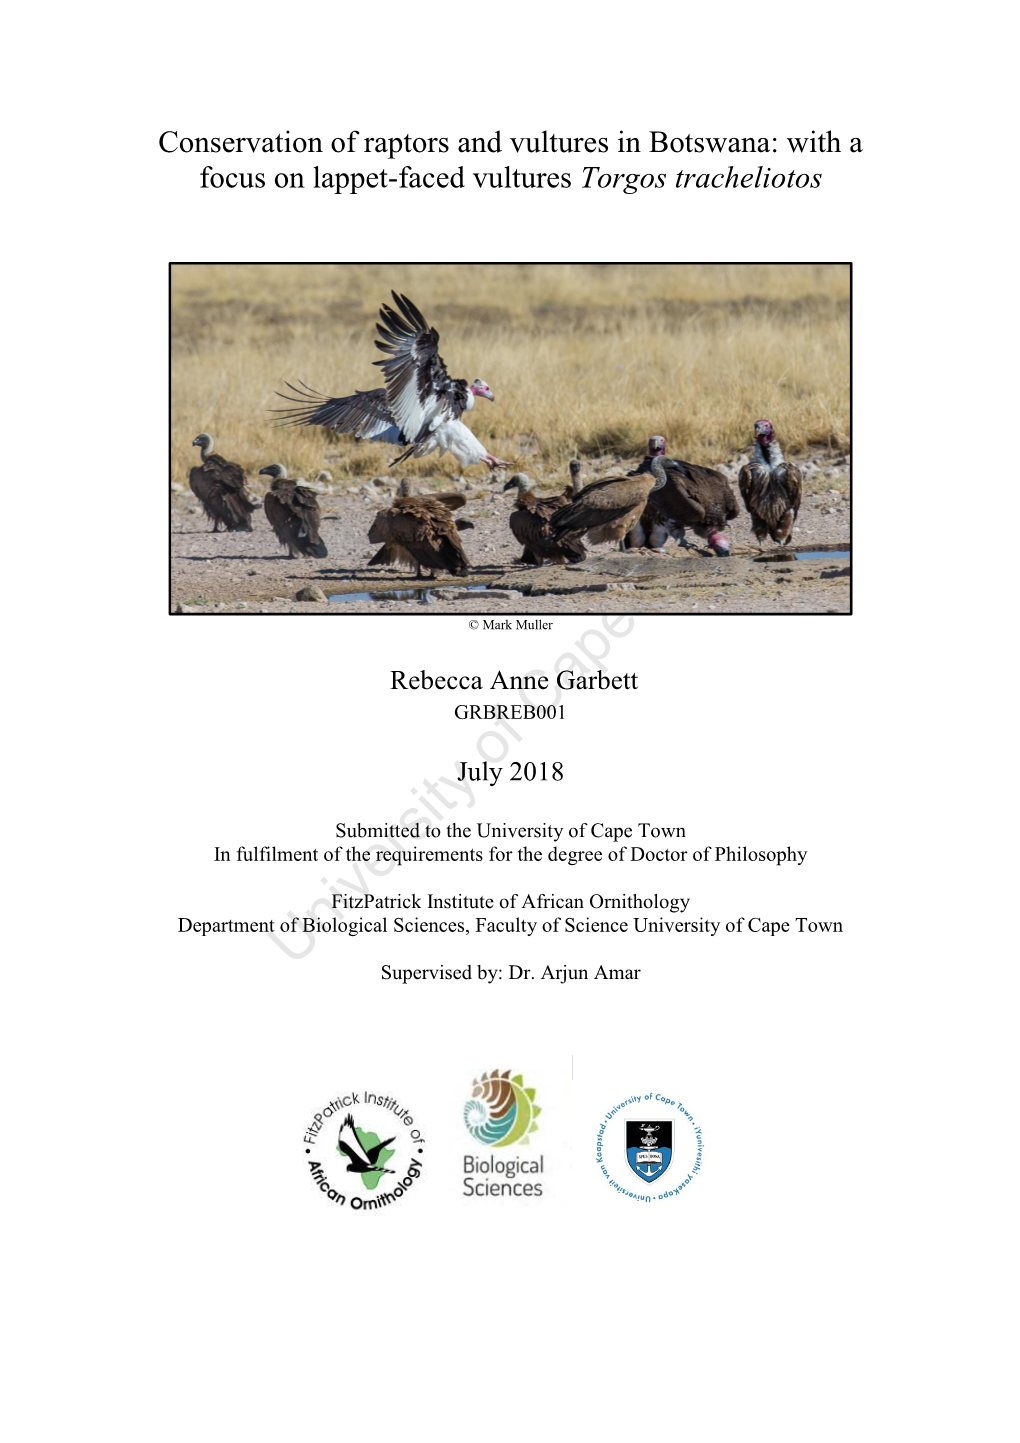 Conservation of Raptors and Vultures in Botswana.Pdf